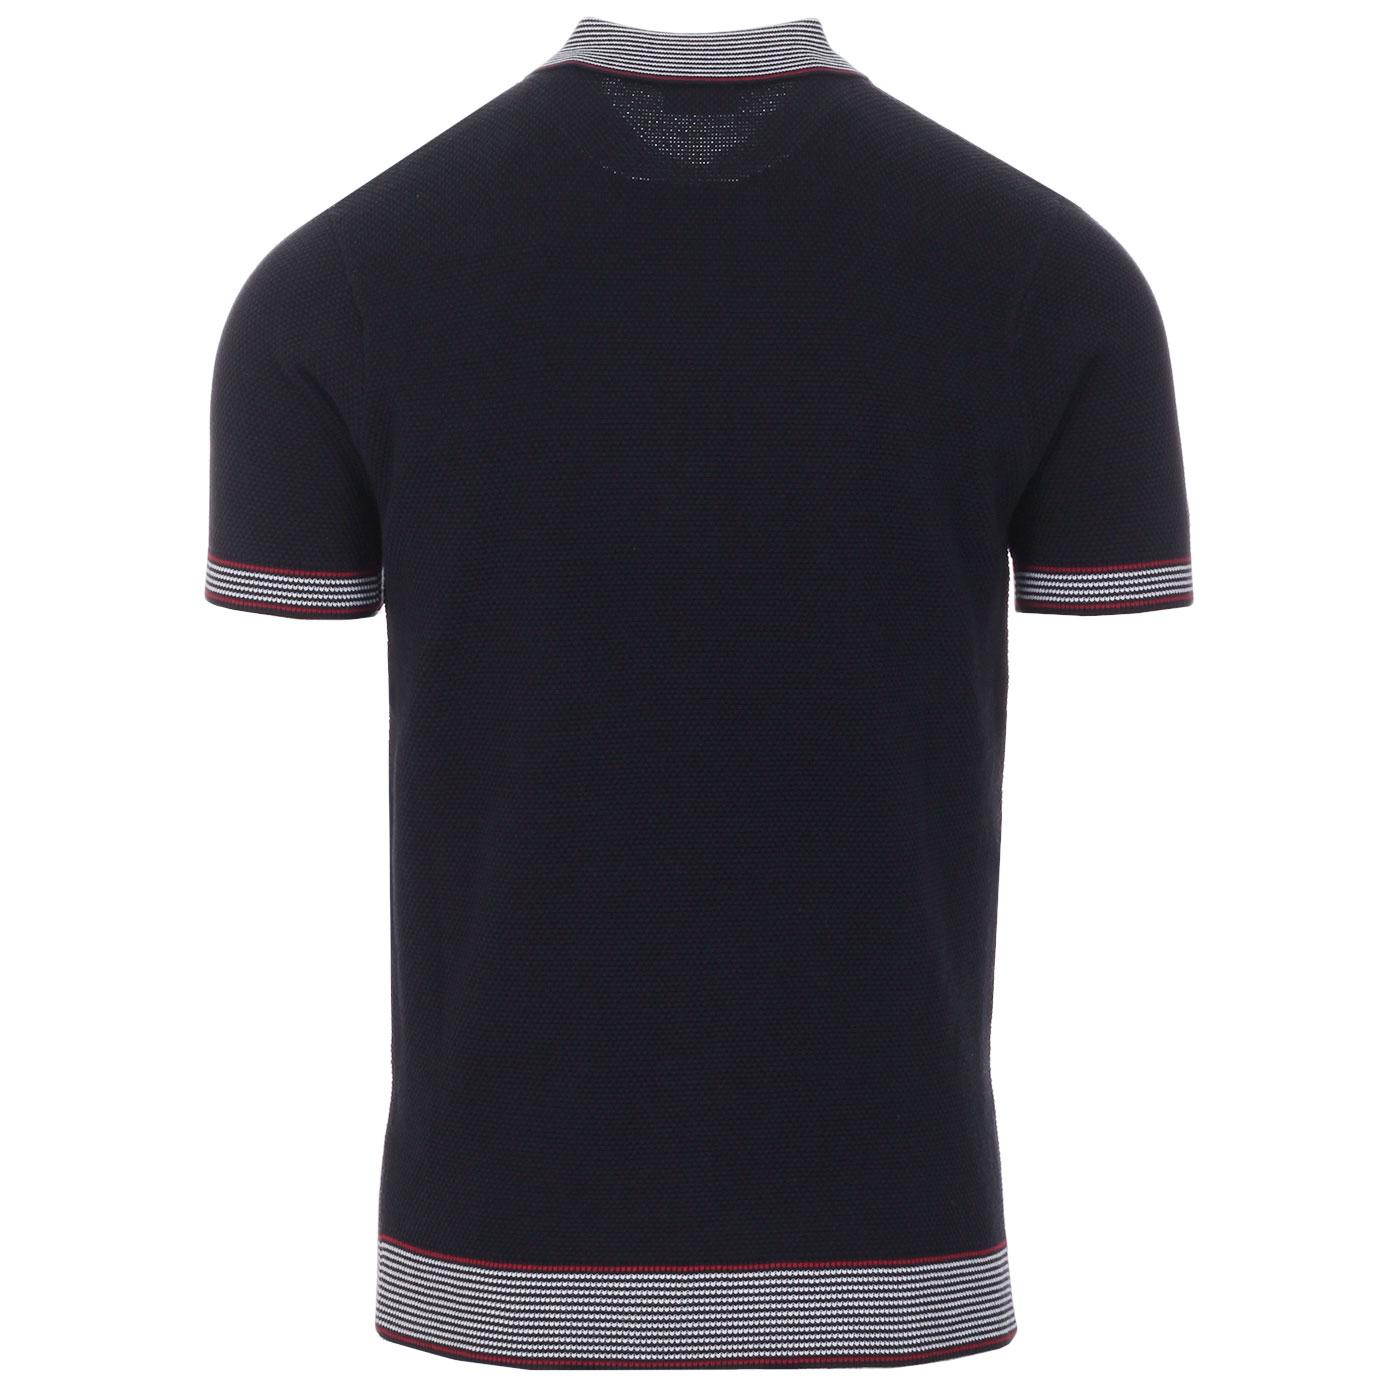 GABICCI VINTAGE Dicaprio 60s Mod Waffle Polo Top in Navy